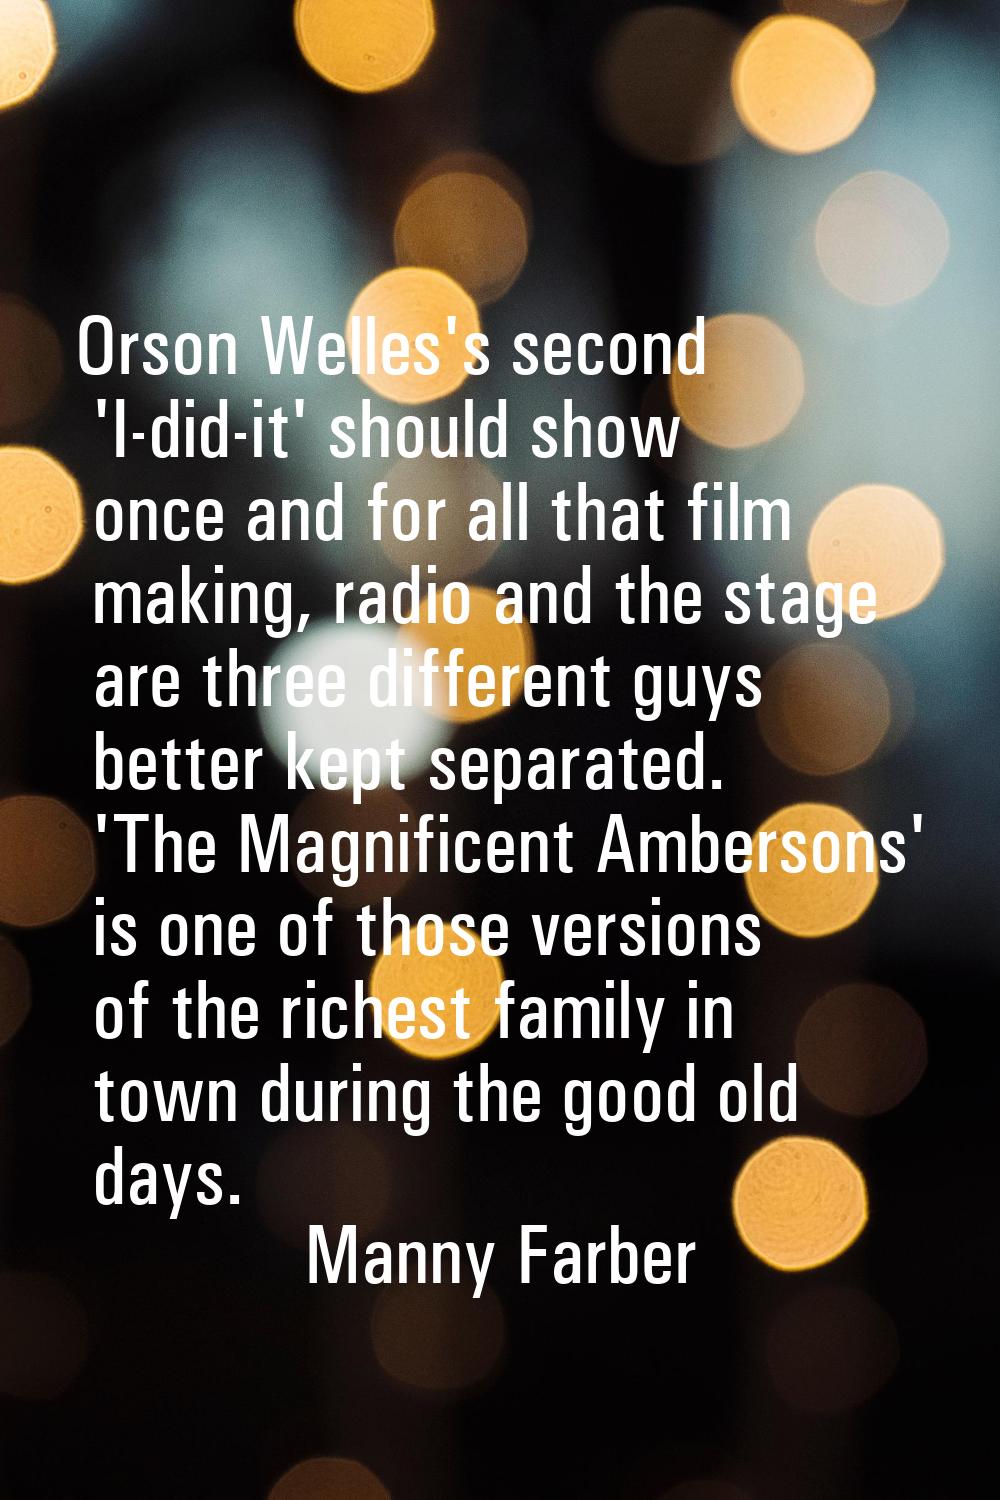 Orson Welles's second 'I-did-it' should show once and for all that film making, radio and the stage